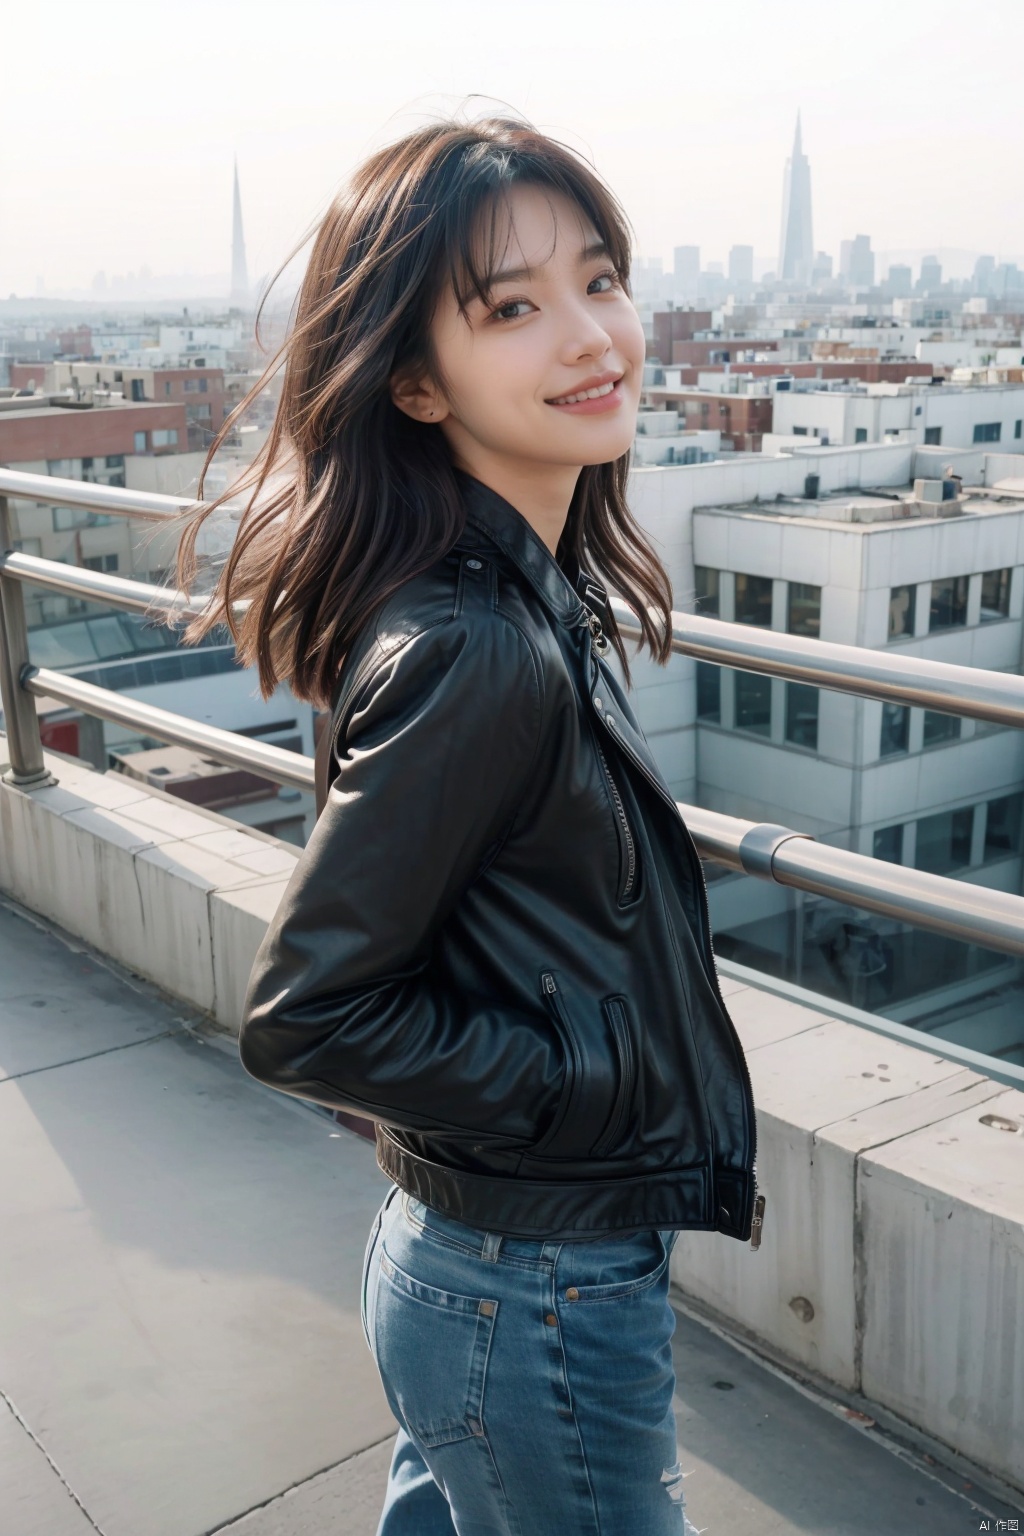  A modern, chic woman wearing a black leather moto jacket and ripped jeans stands confidently on the rooftop of a skyscraper, gazing out at the city skyline. Her short, tousled hair is swept back by the wind as she smiles subtly, embodying a sense of independence and strength. The shot is captured with a Sony A7R IV using a 24-70mm f/2.8 lens from a slightly elevated angle, maintaining sharp focus on her face and the sprawling city behind her. The photograph exudes a bold and empowering energy, reminiscent of Annie Leibovitz's portraits.